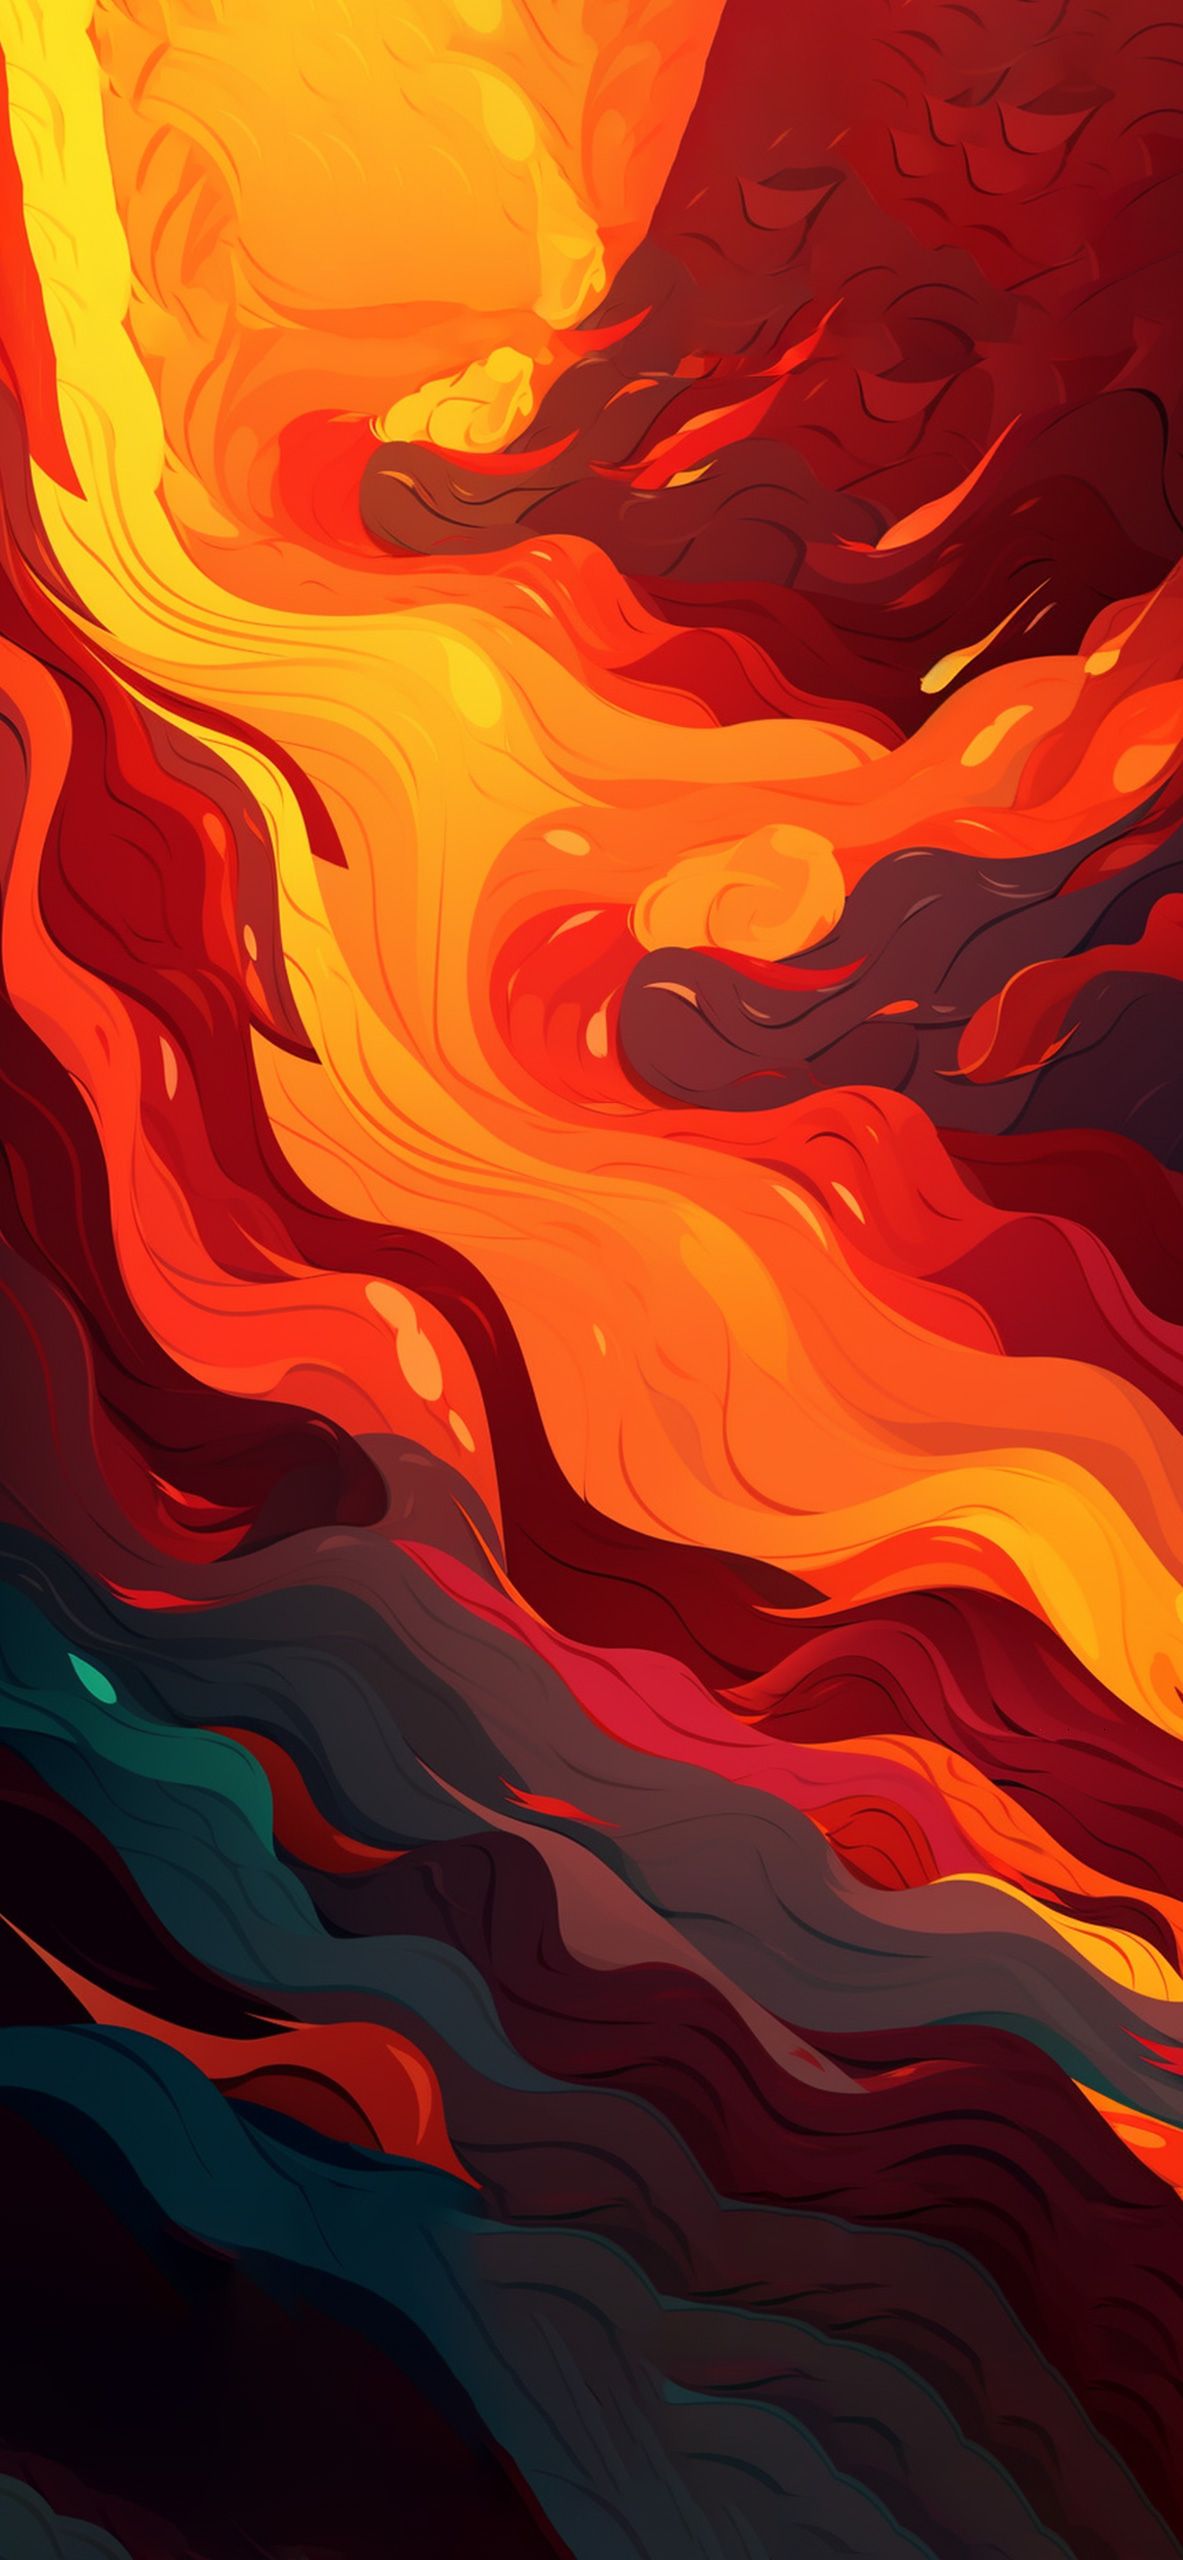 Fire iPhone 8 wallpaper - Abstract